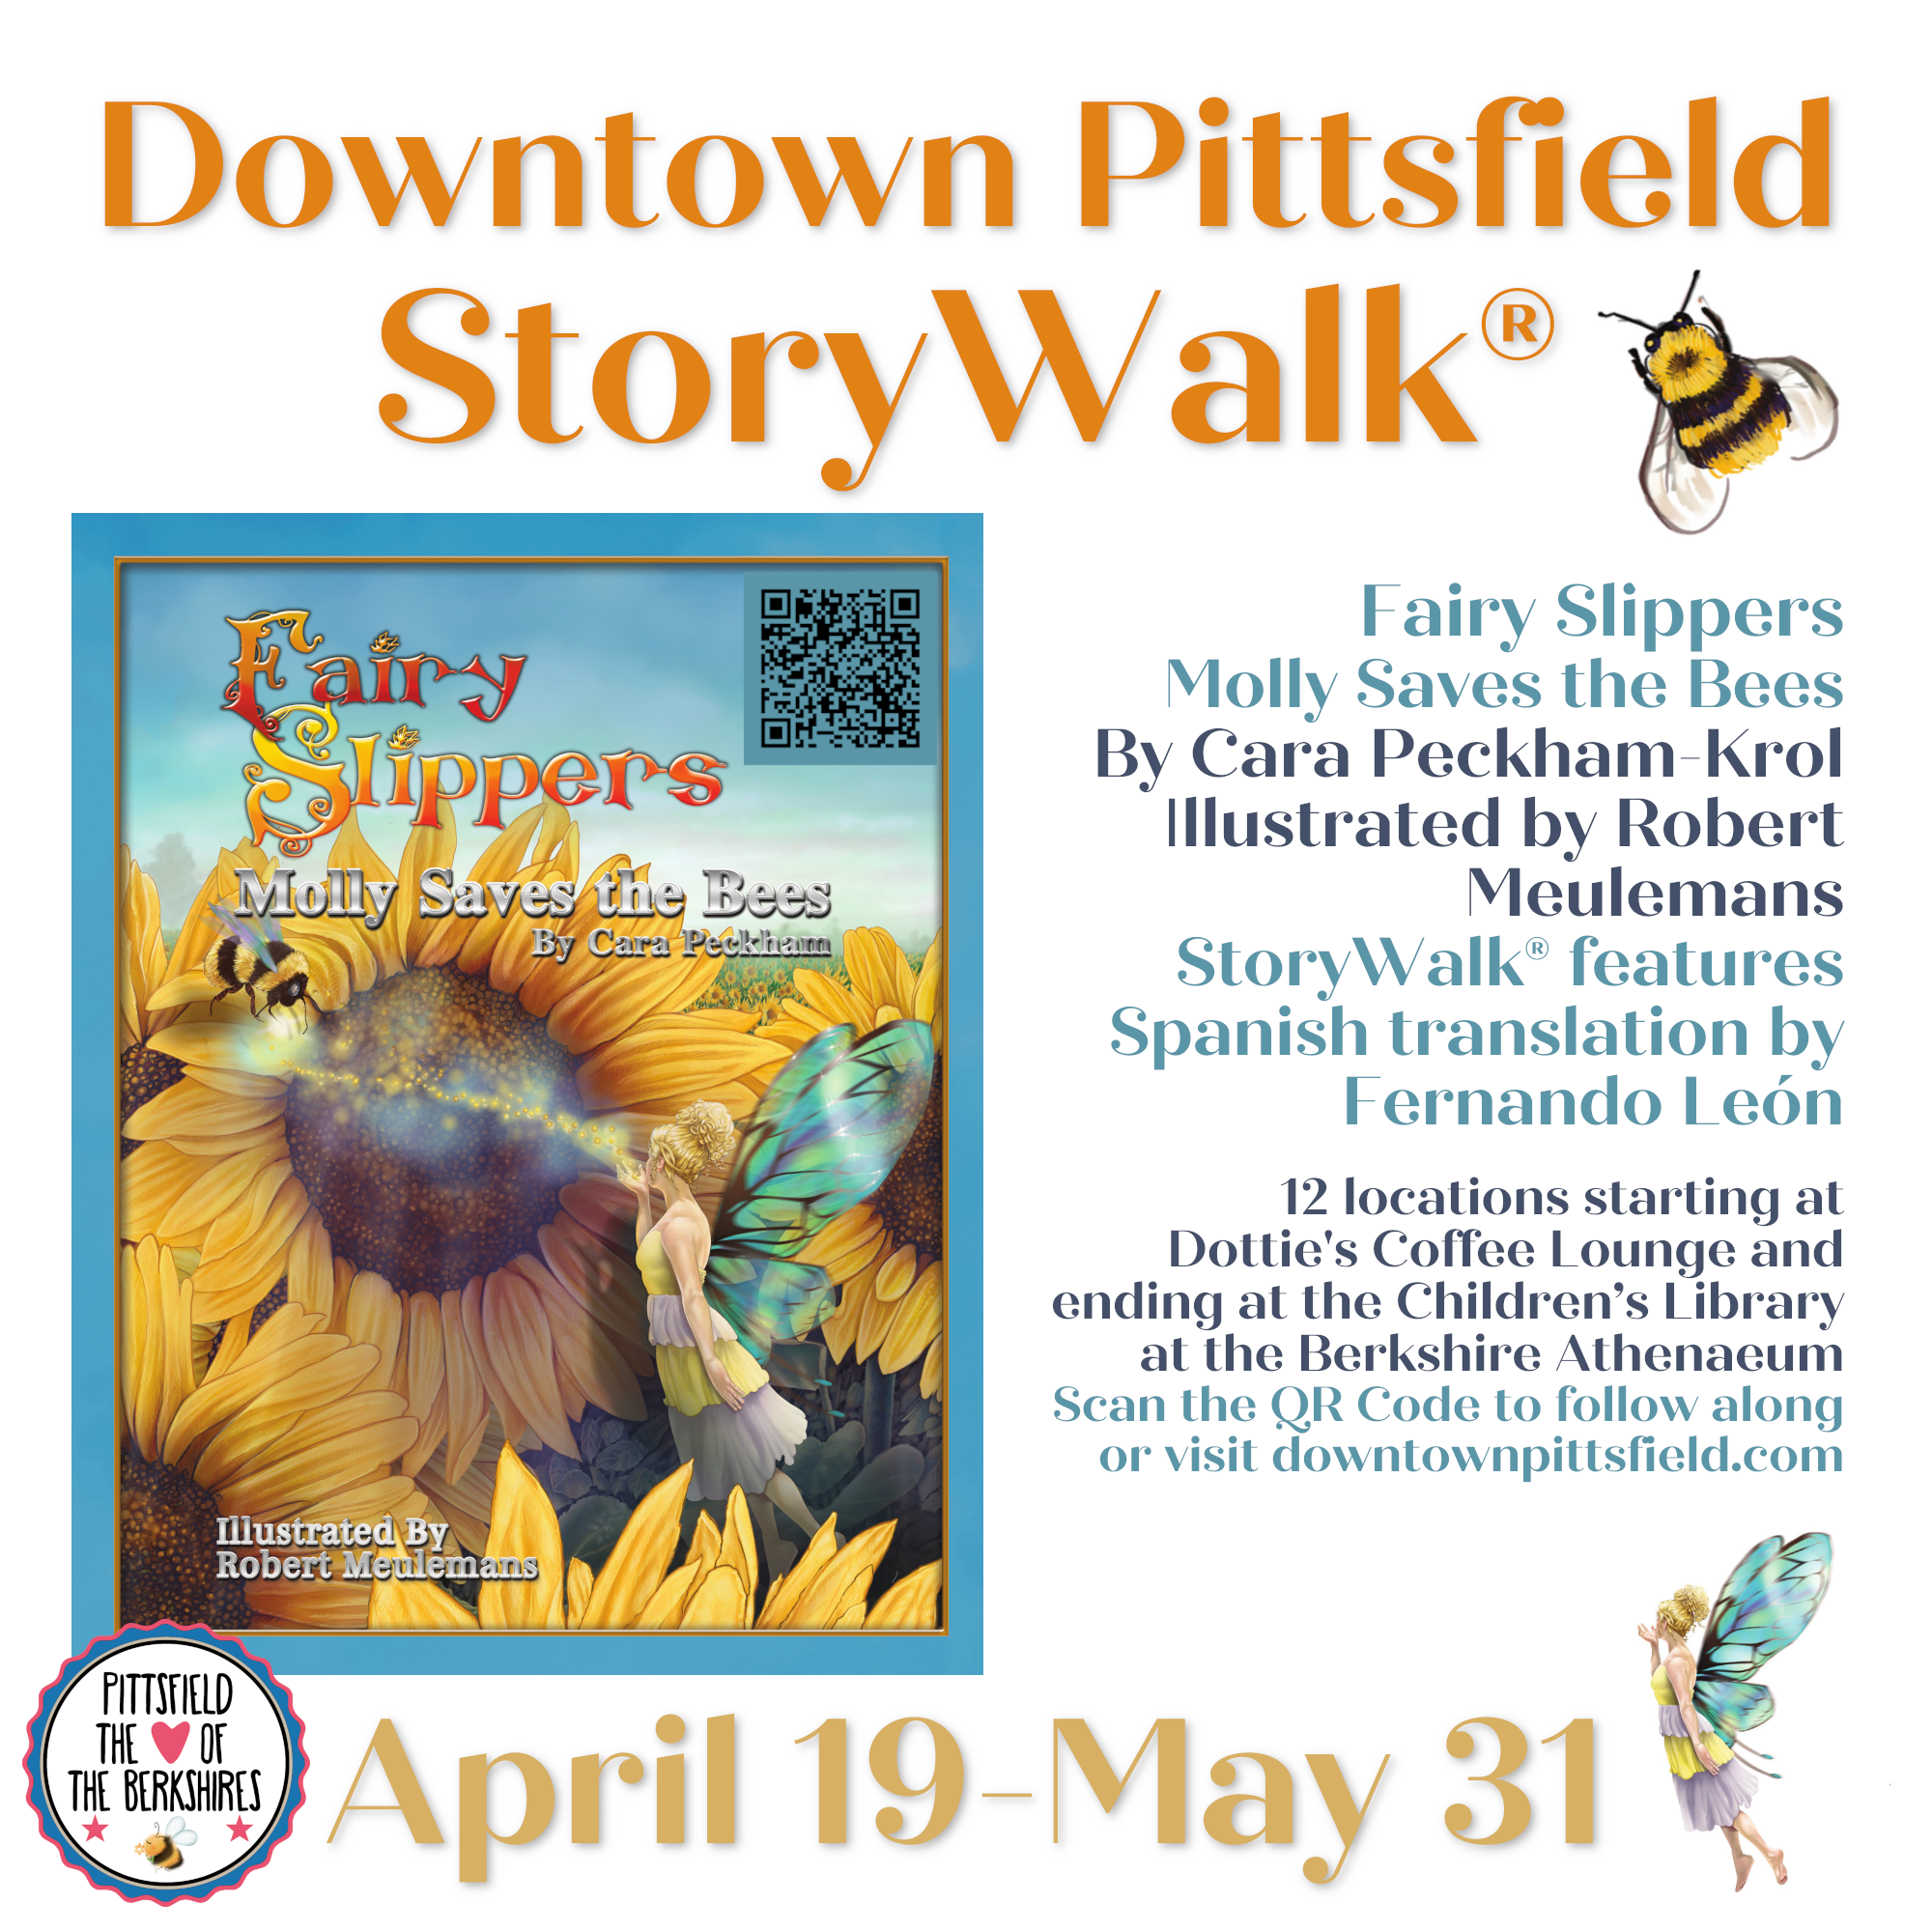 StoryWalk® Fairy Slippers Molly Saves the Bees